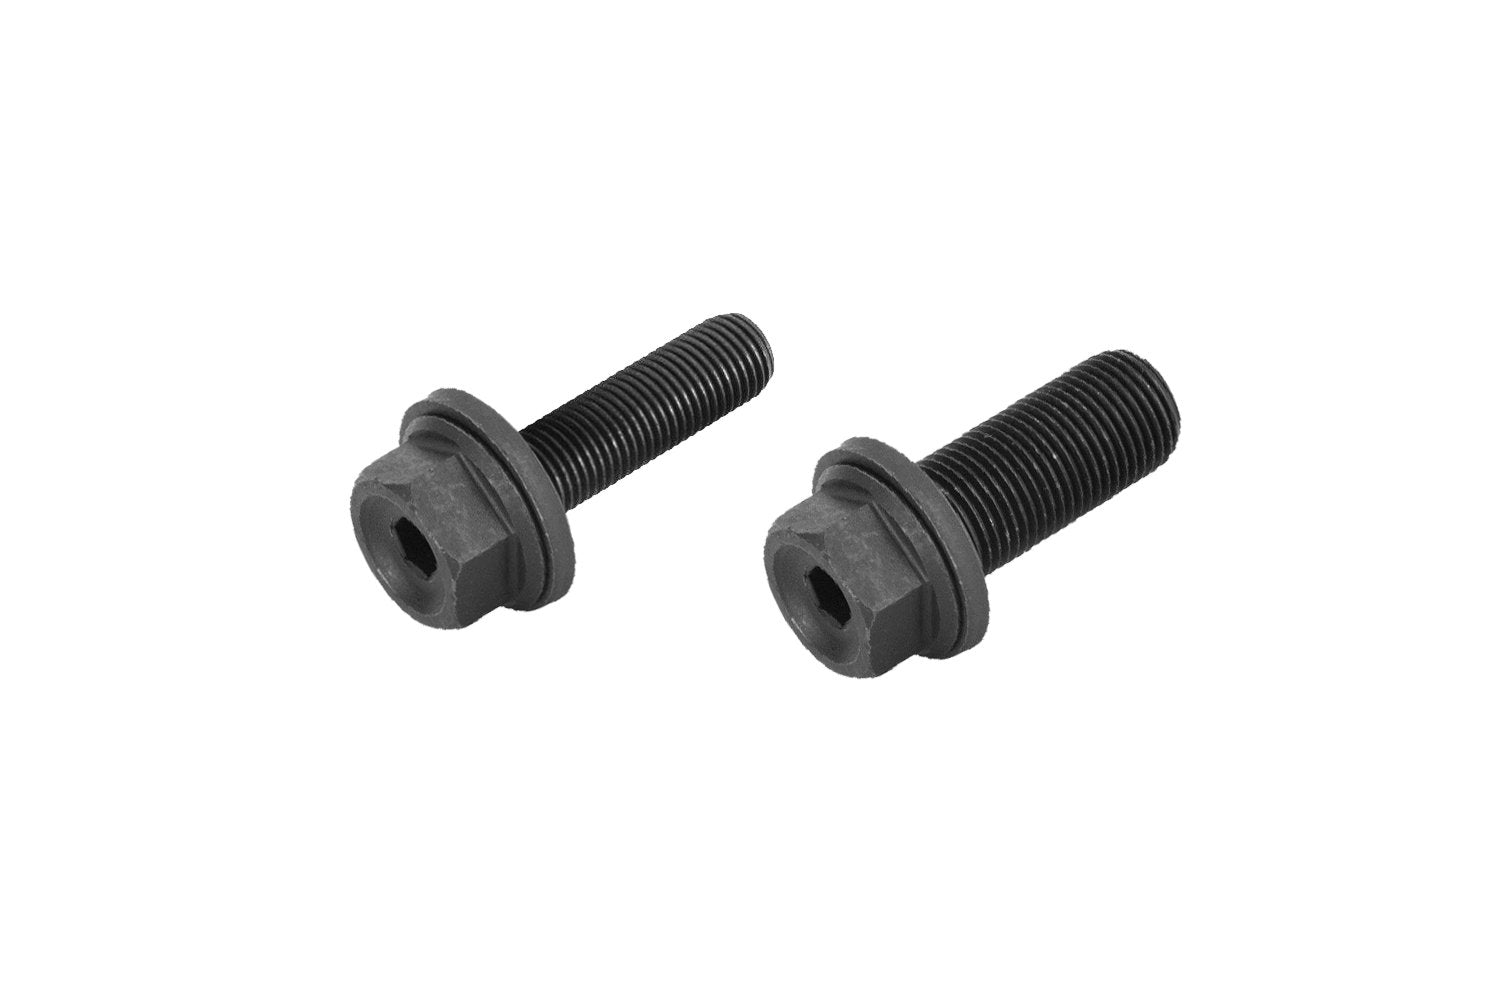 GSPORT Axle Bolts (3/8 OR 14MM) - Downtown Bicycle Works 